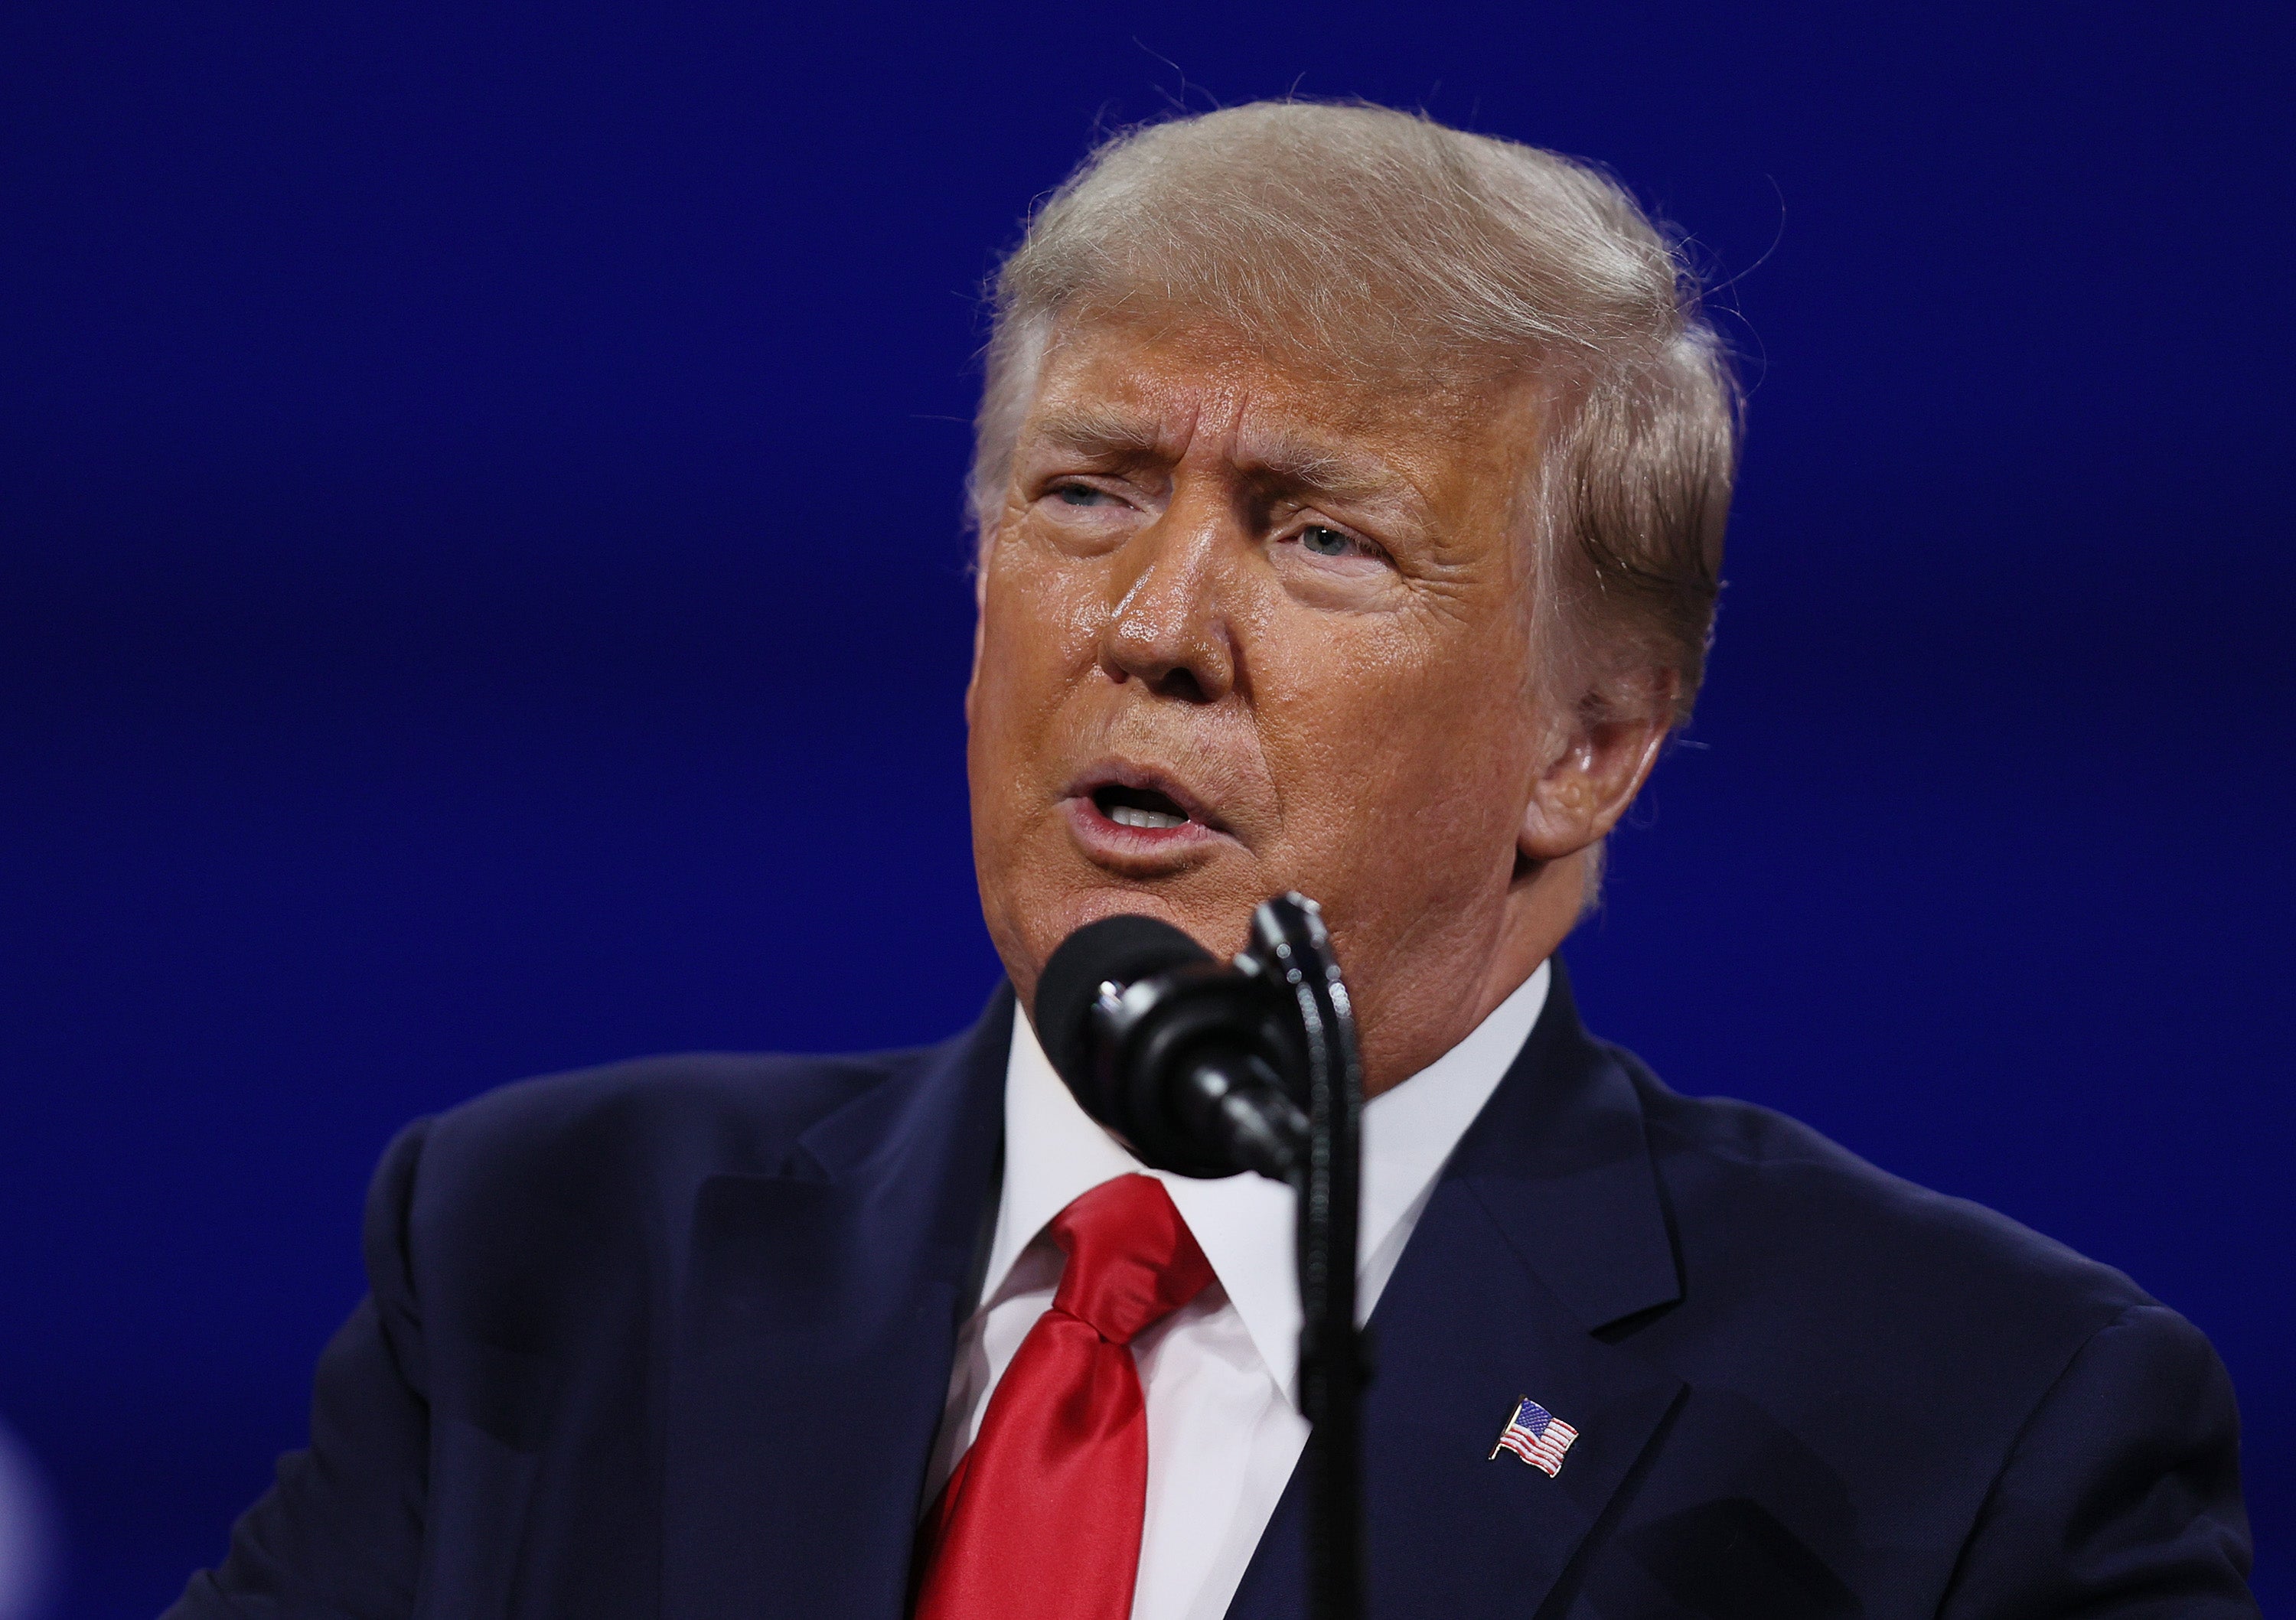 Former President Donald Trump addresses the Conservative Political Action Conference held in the Hyatt Regency on 28 February, 2021 in Orlando, Florida. The Trump Organization could soon be facing criminal charges, according to The New York Times.